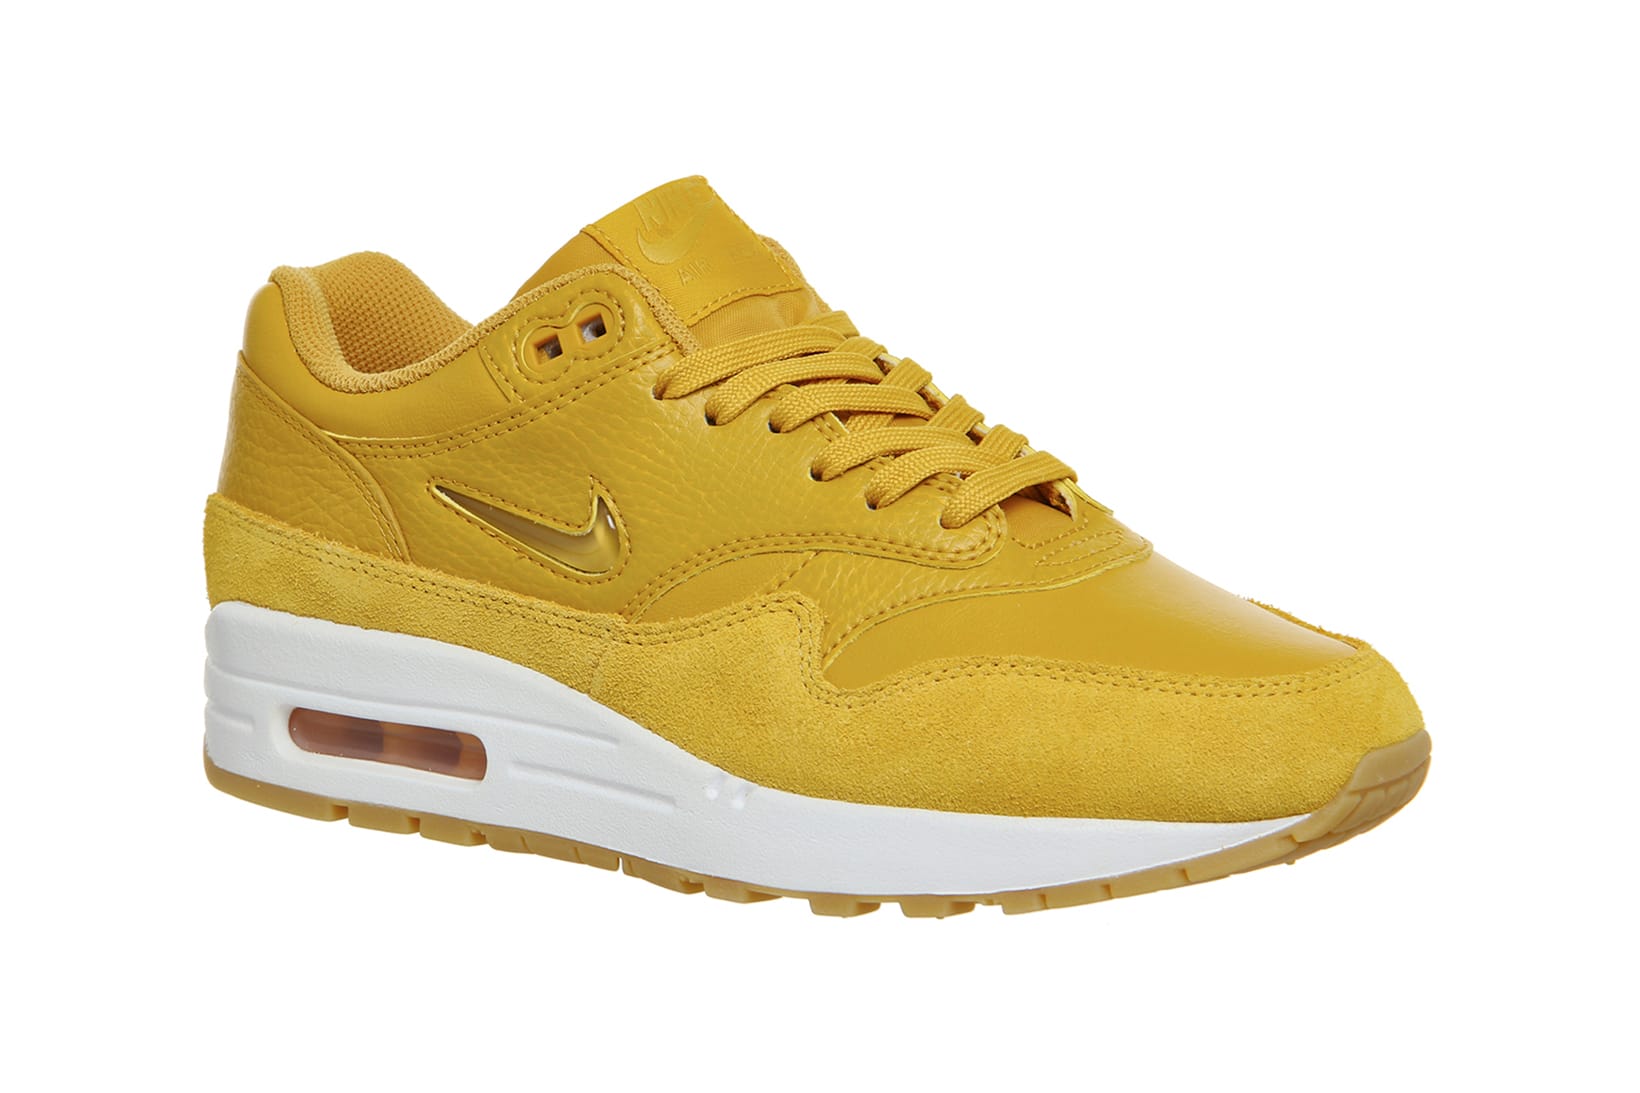 Air Max 1 Jewel in Mineral Yellow 